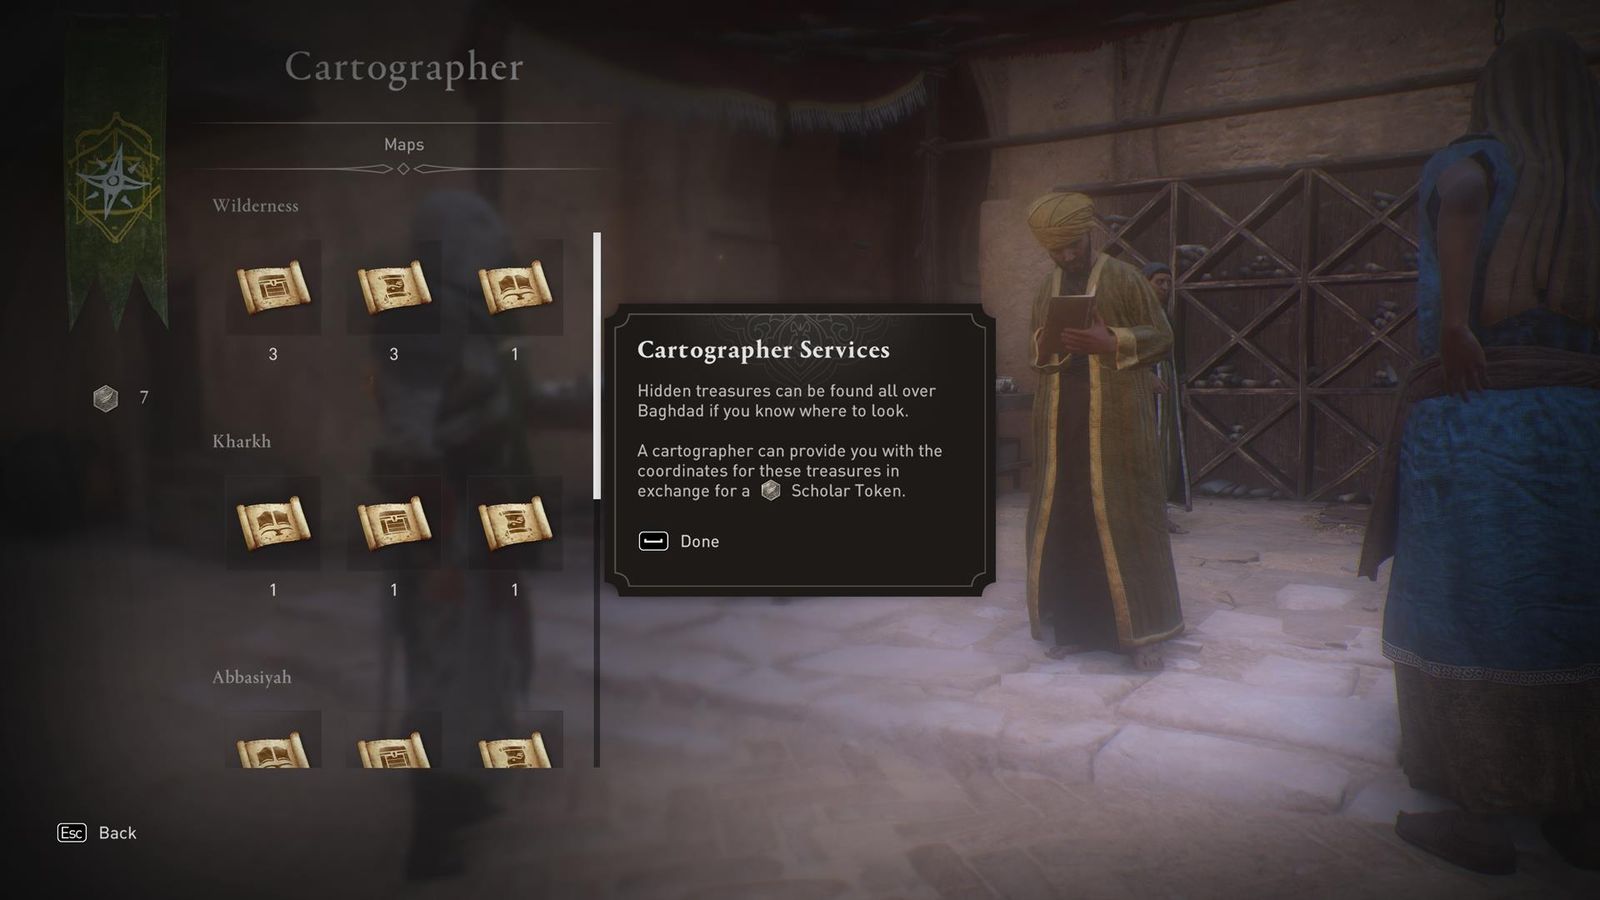 The Cartographer's available maps are shown, and each one costs Scholar Tokens.